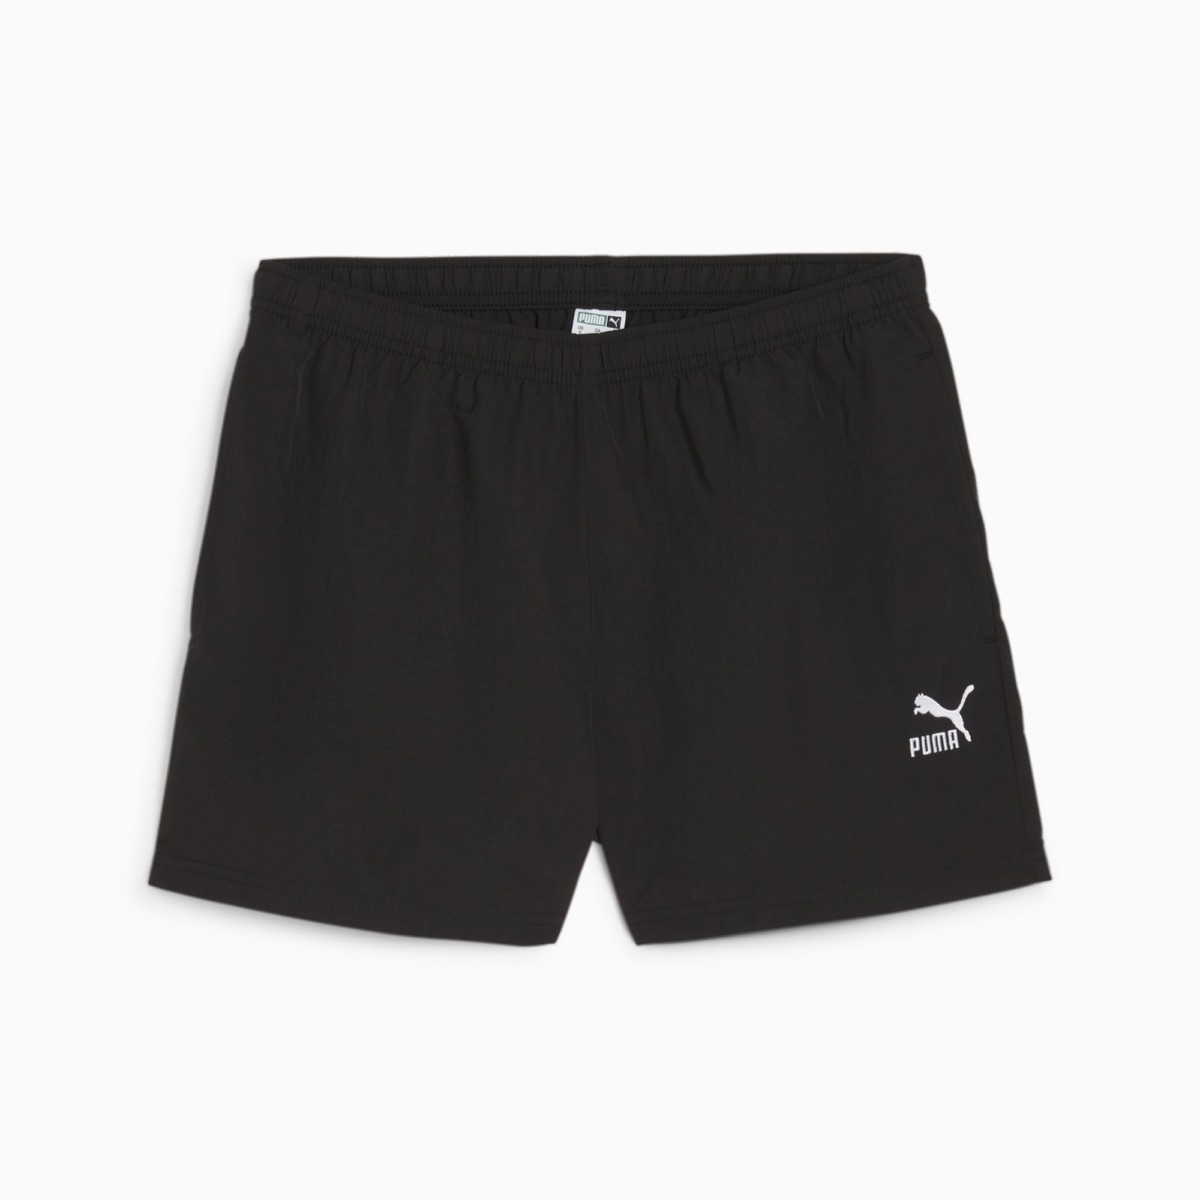 Shorts in Black for Women from Puma GOOFASH